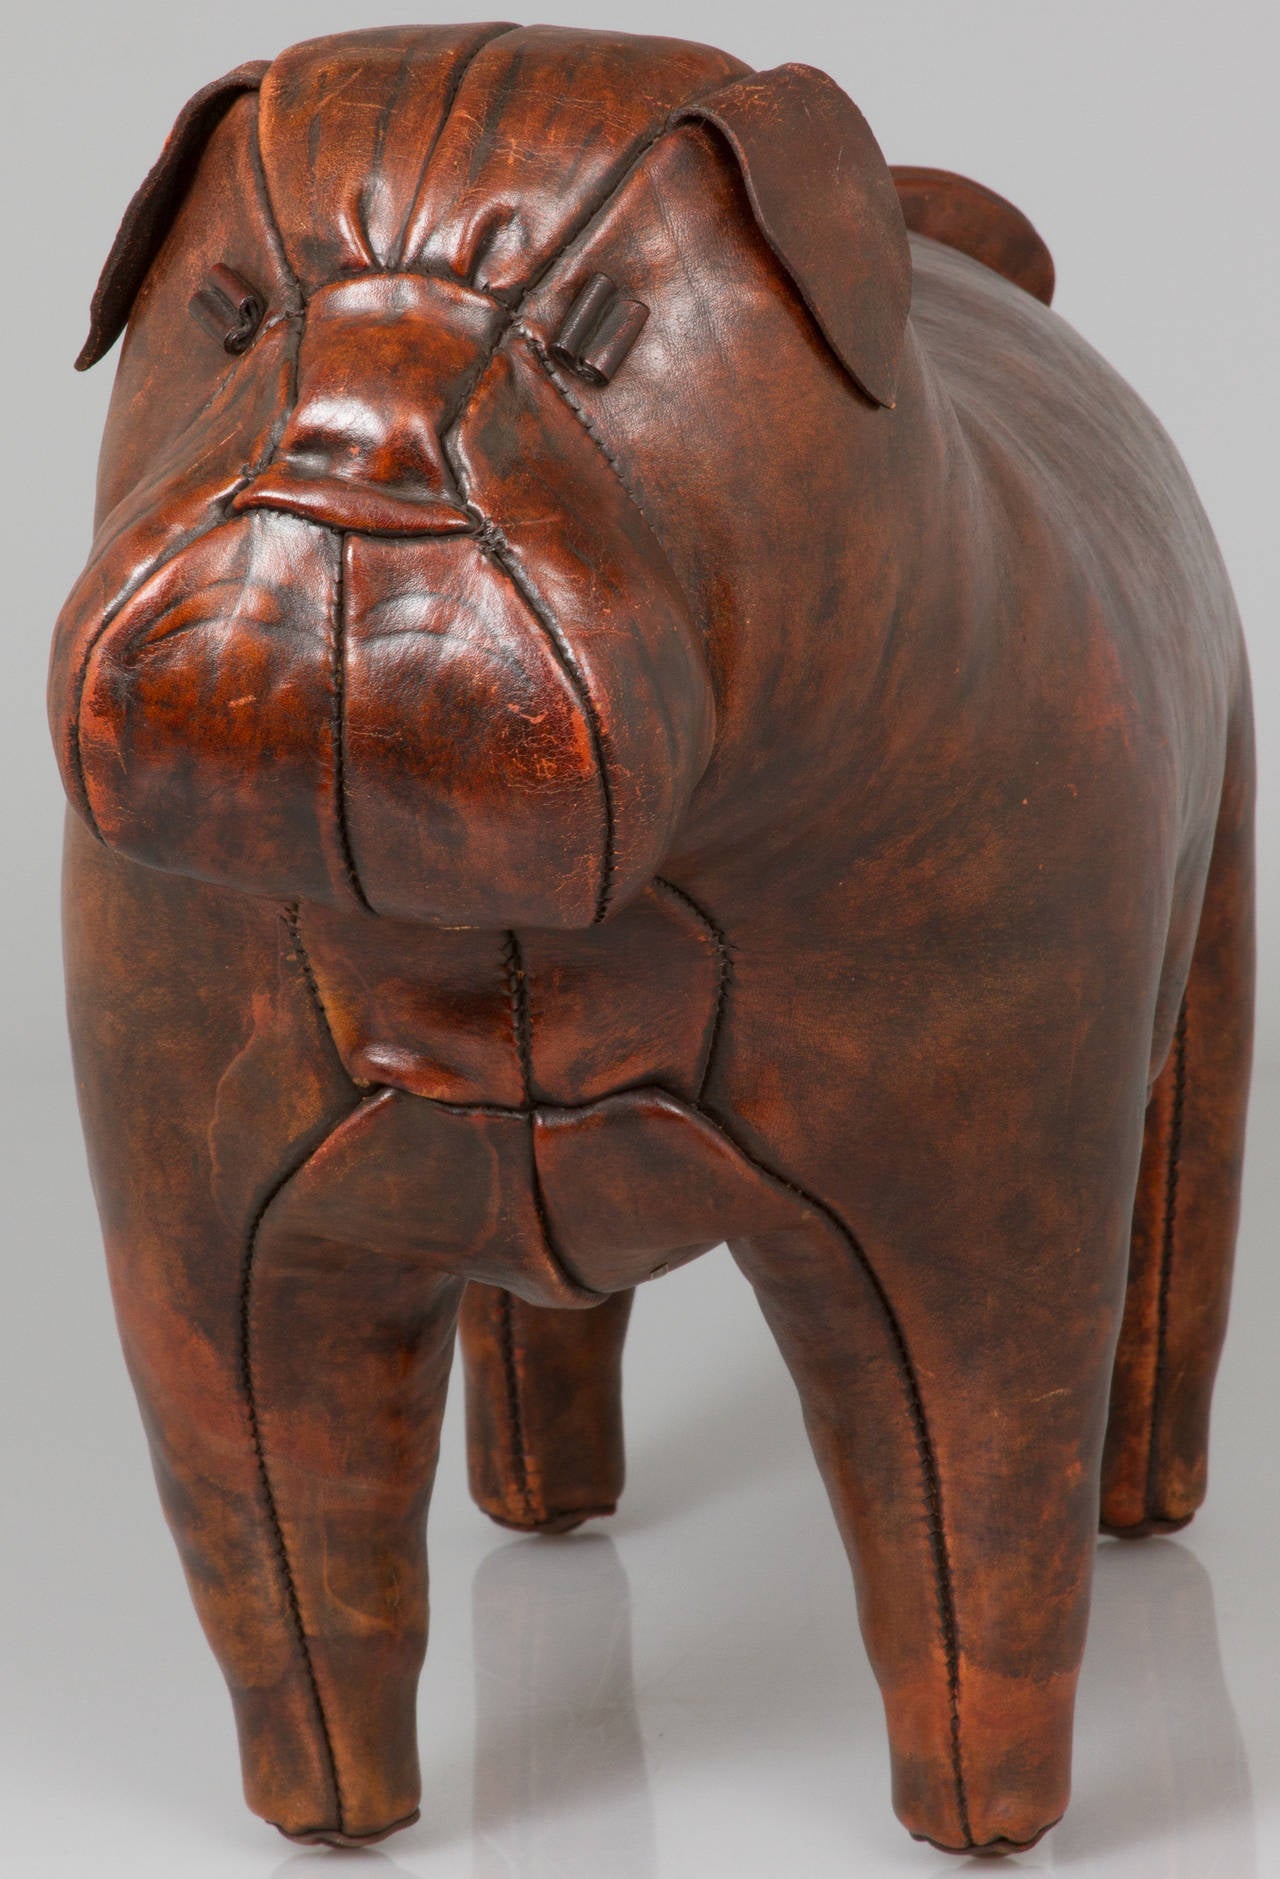 Vintage Bulldog Sculpture by Omersa for Abercrombie & Fitch In Excellent Condition For Sale In Chicago, IL